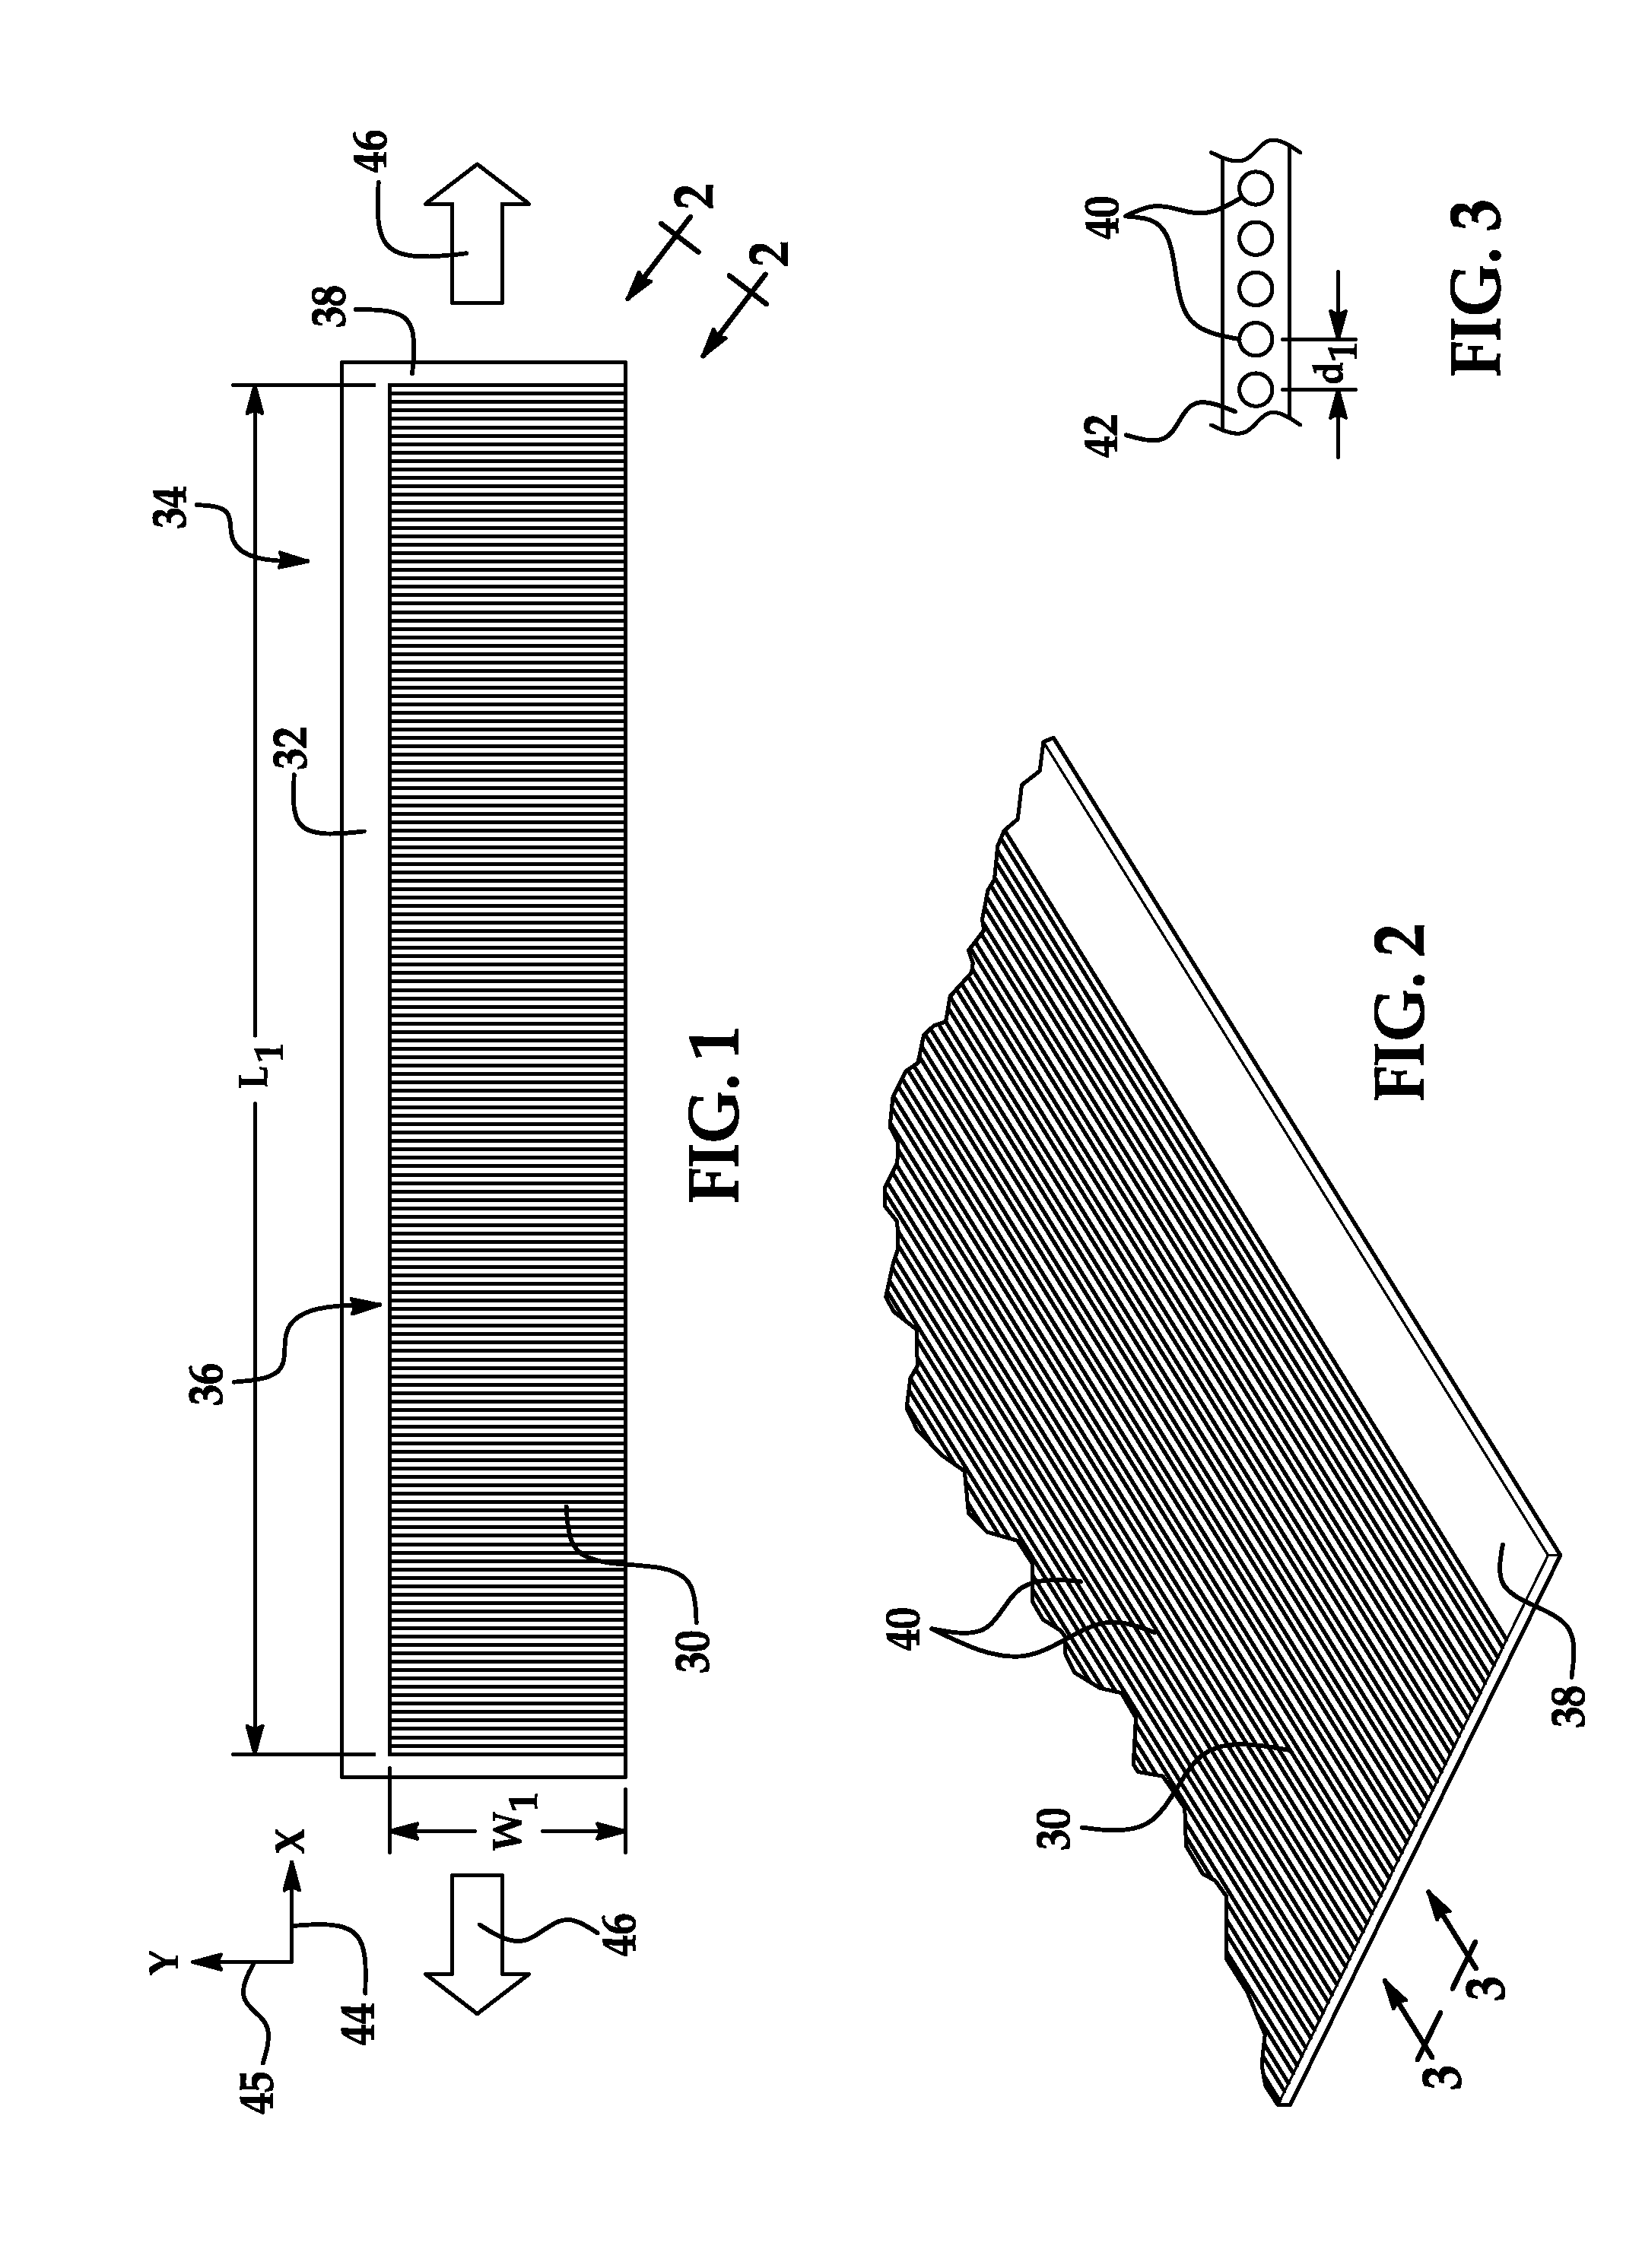 Method of Fabricating a Curved Composite Structure Using Composite Prepreg Tape